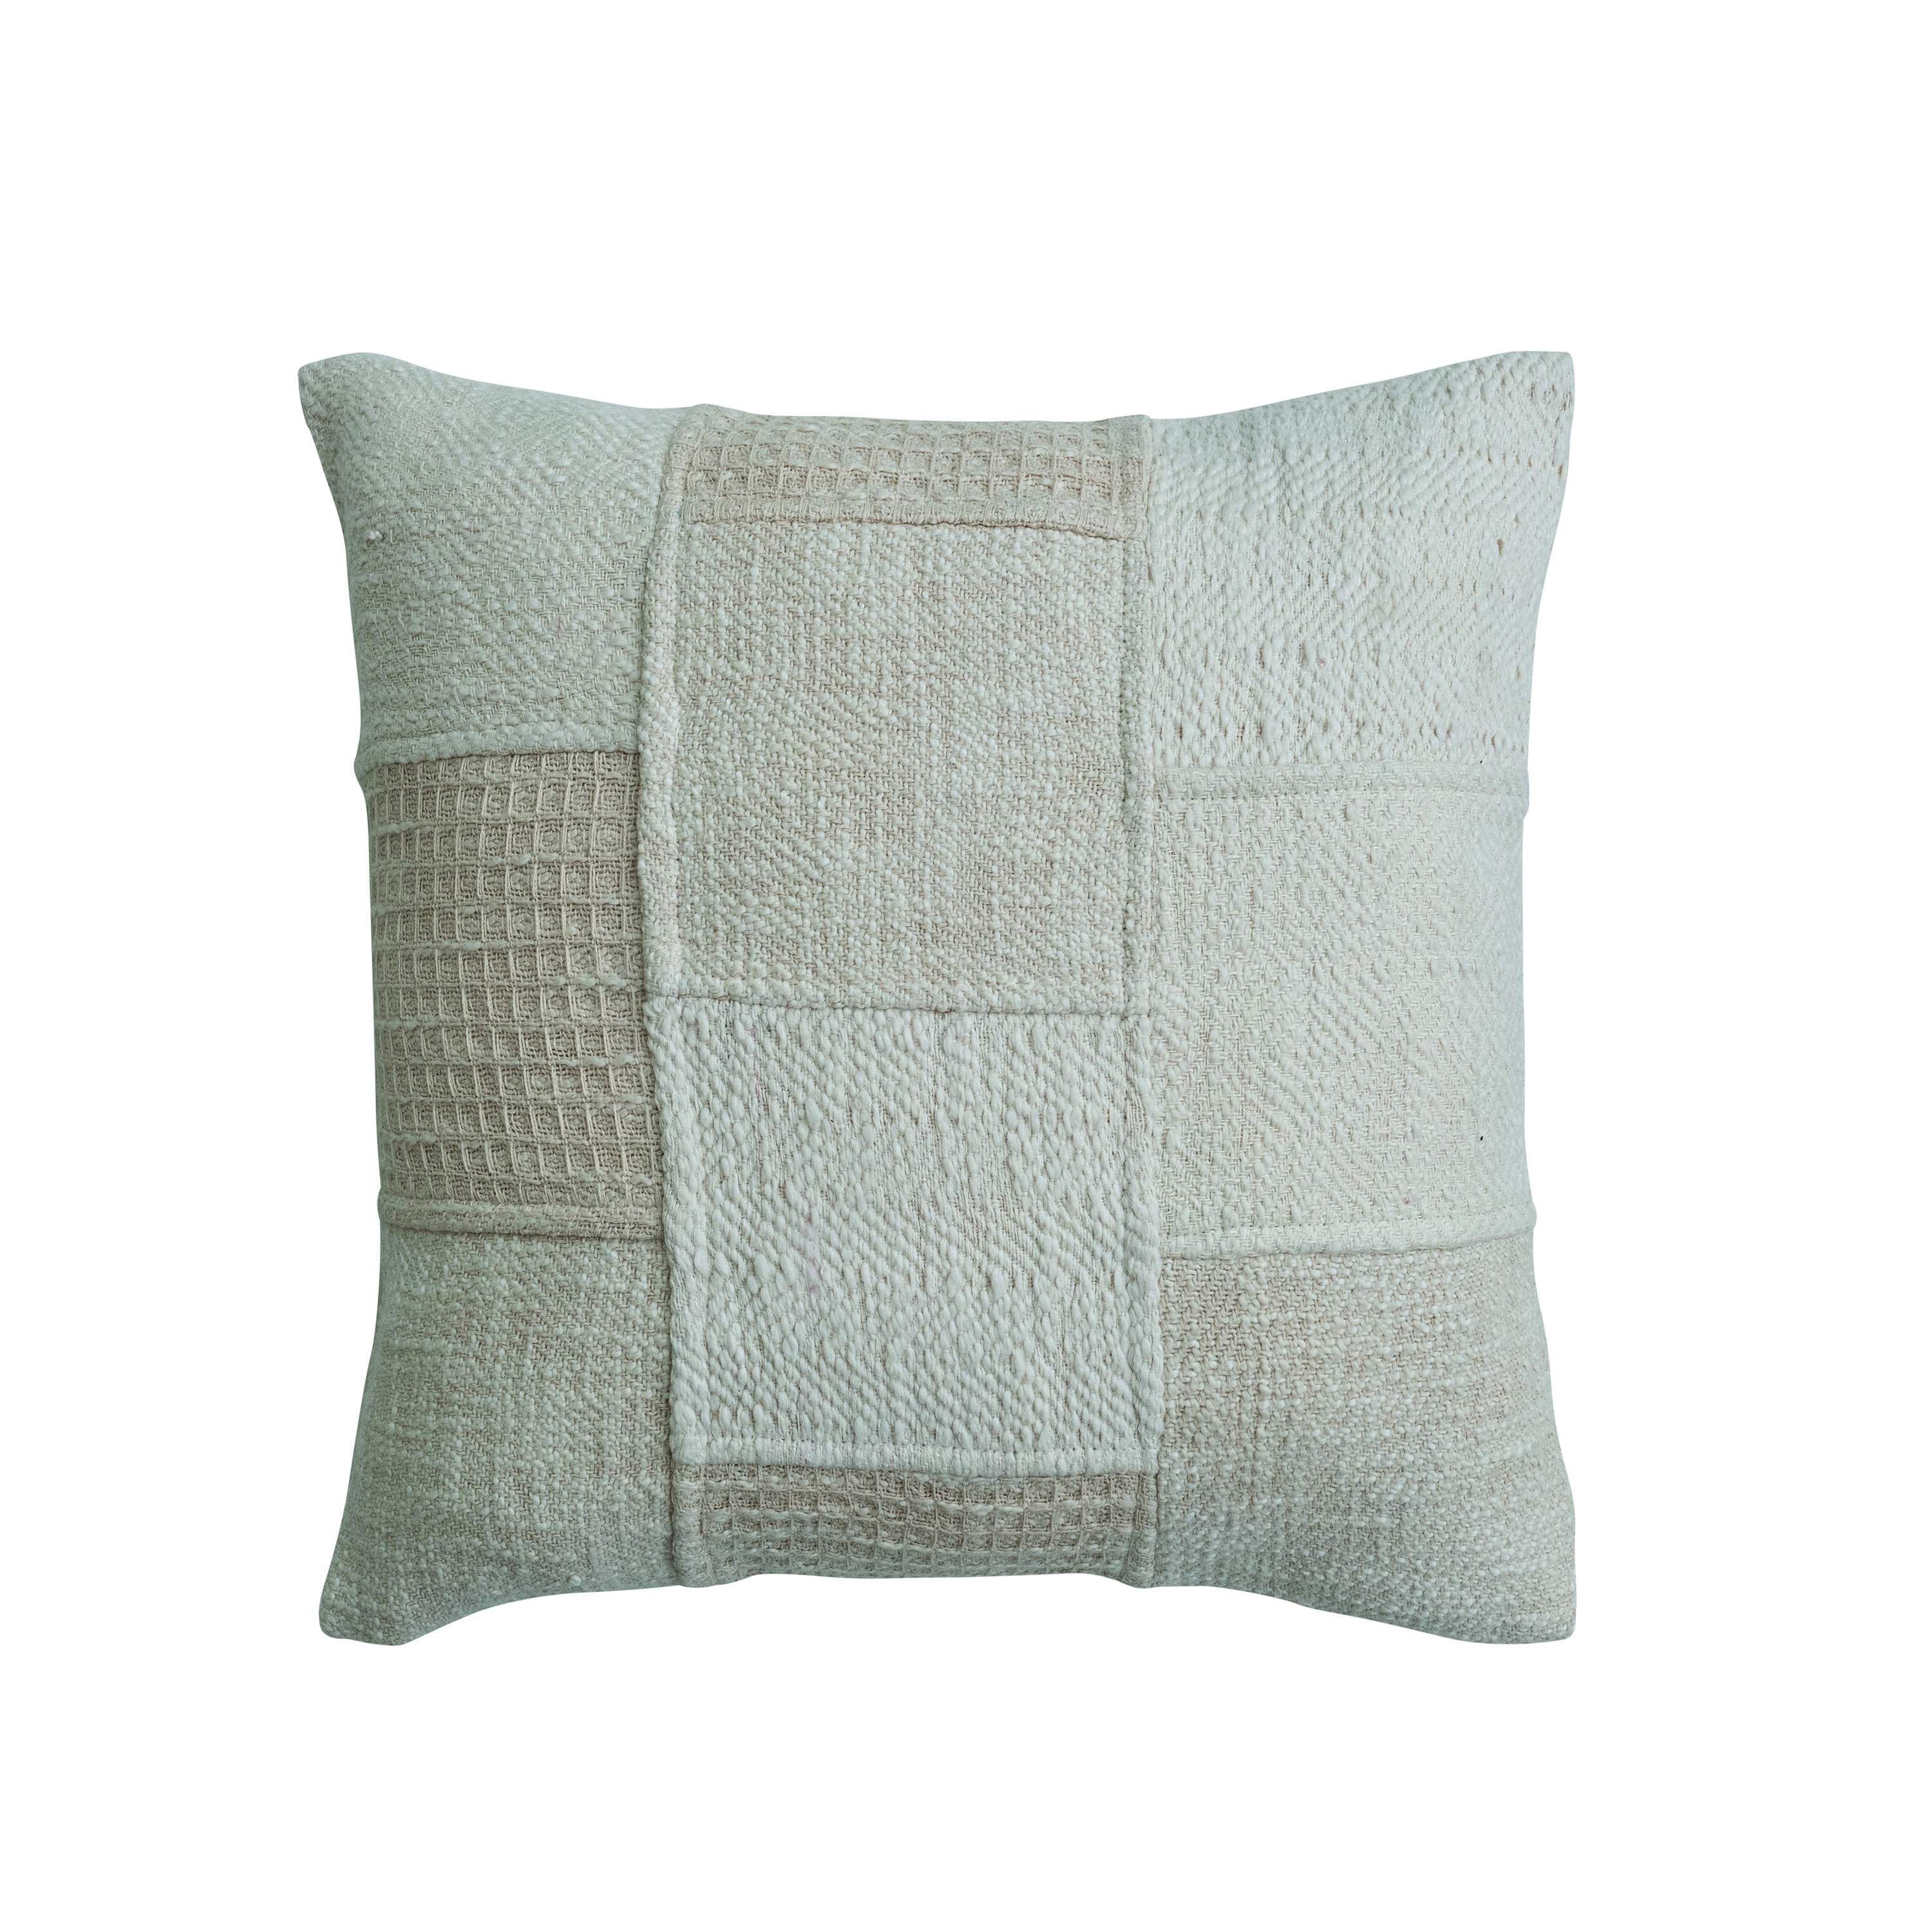 18 Inches Square Cotton Patchwork Pillow, Cream and Natural - Image 0